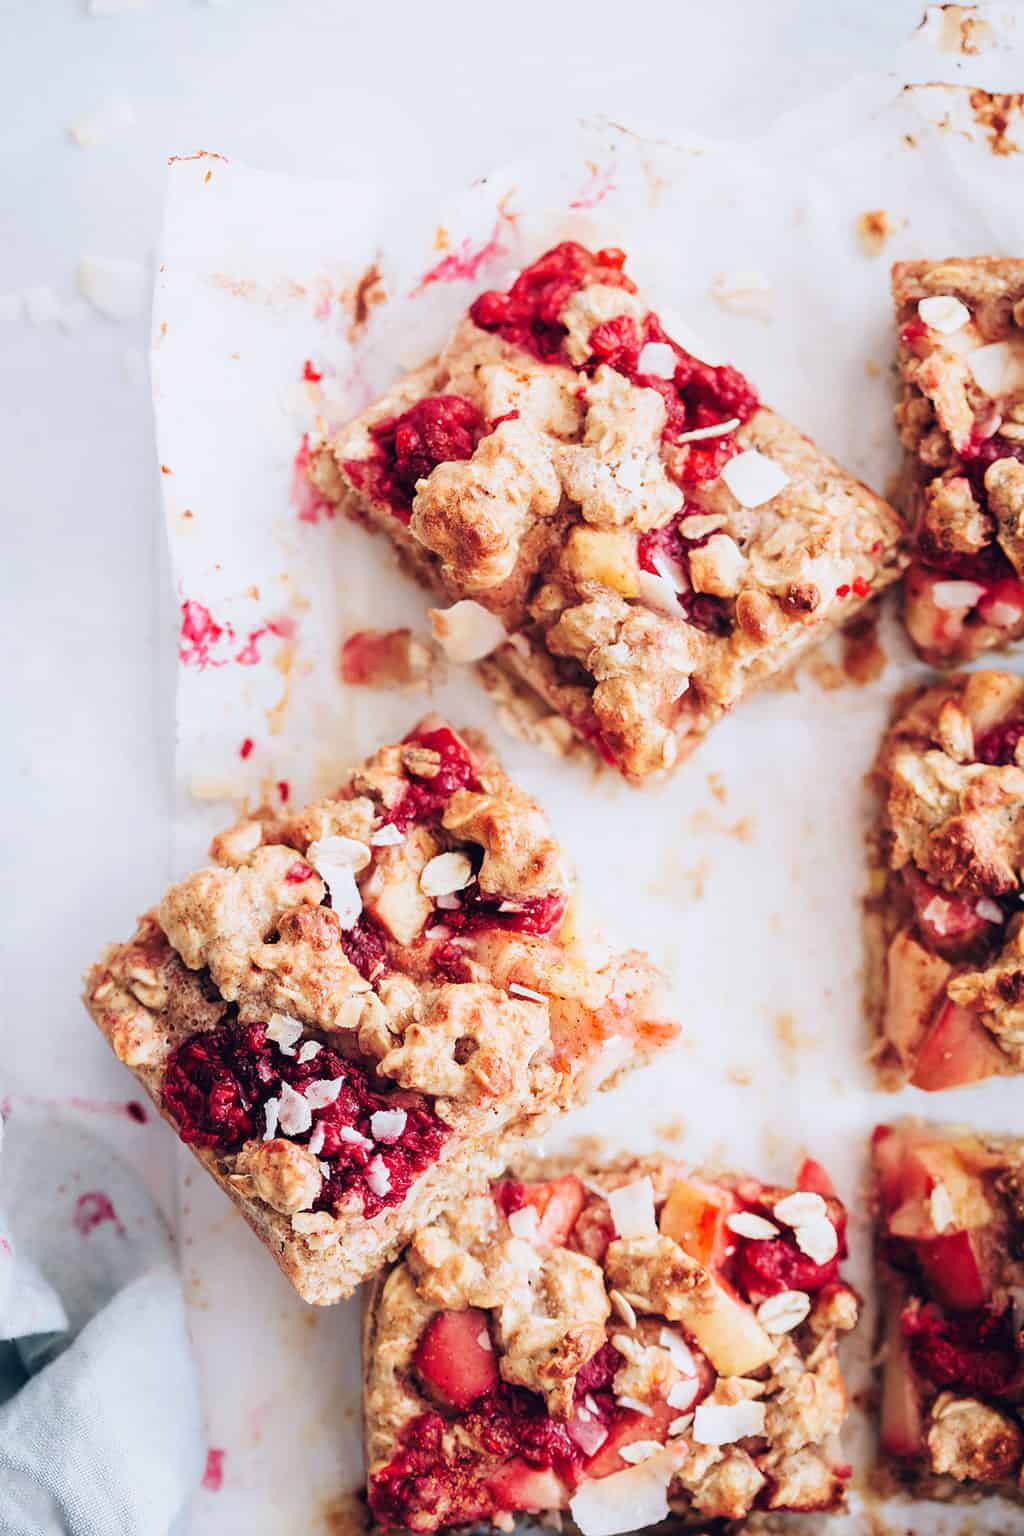 12 All-Natural Pink and Red Recipes That Are Still a Treat - Apple Crumble Bars with Raspberries